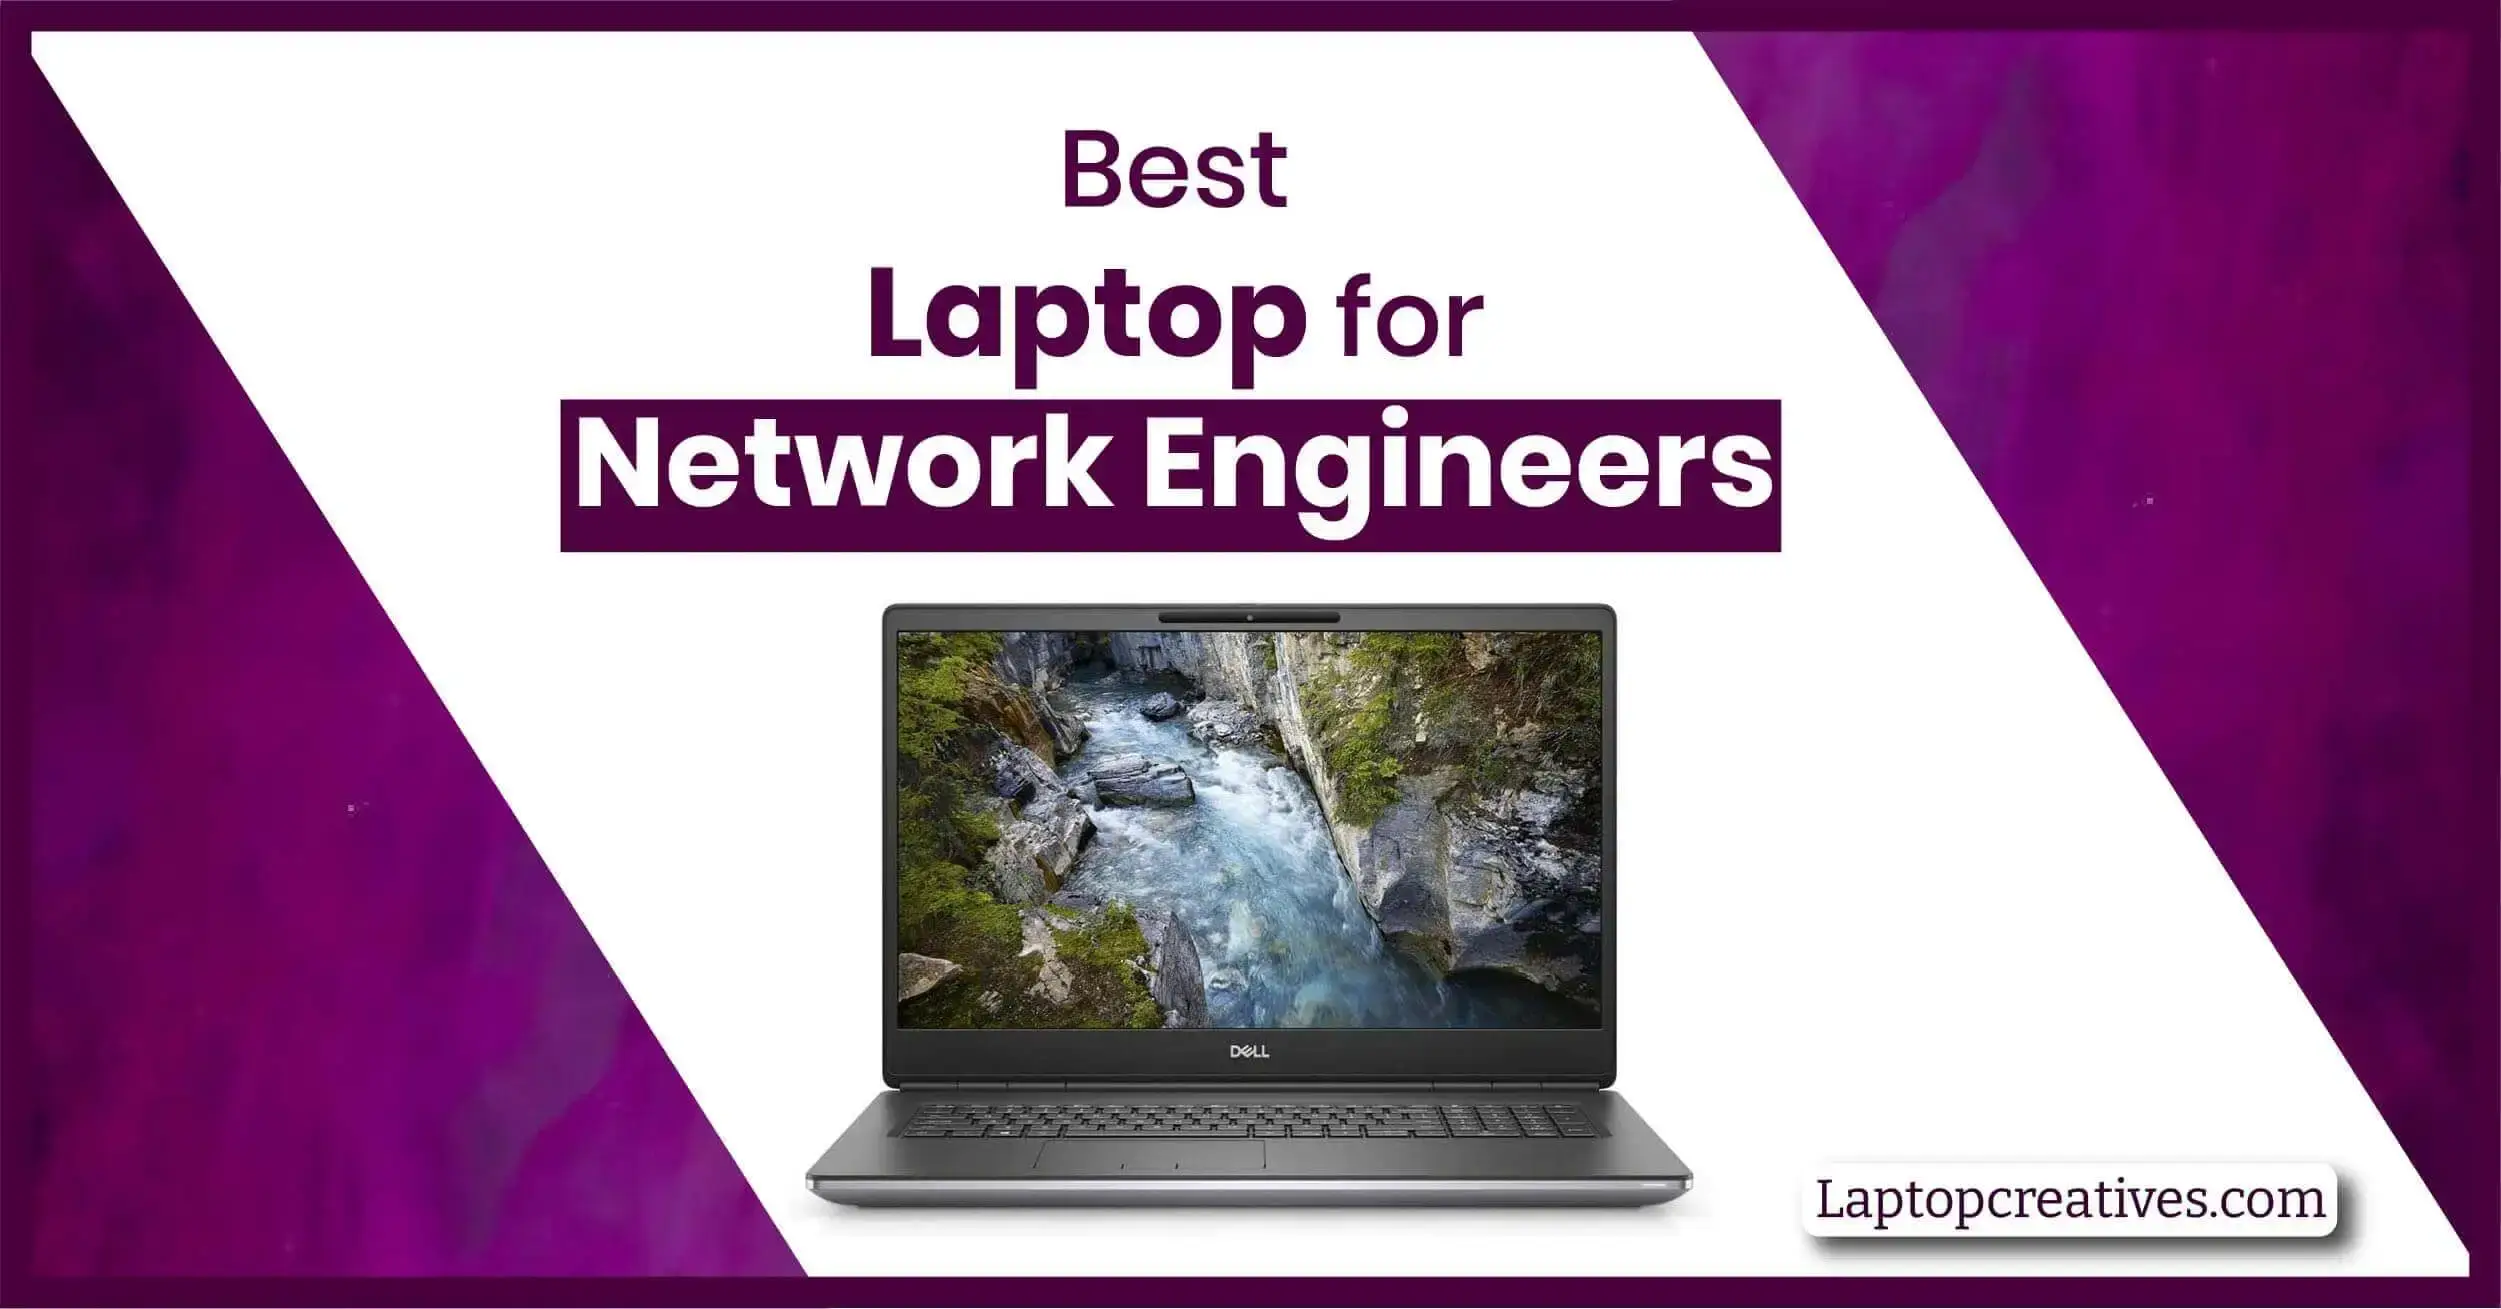 Best Laptop for Network Engineers